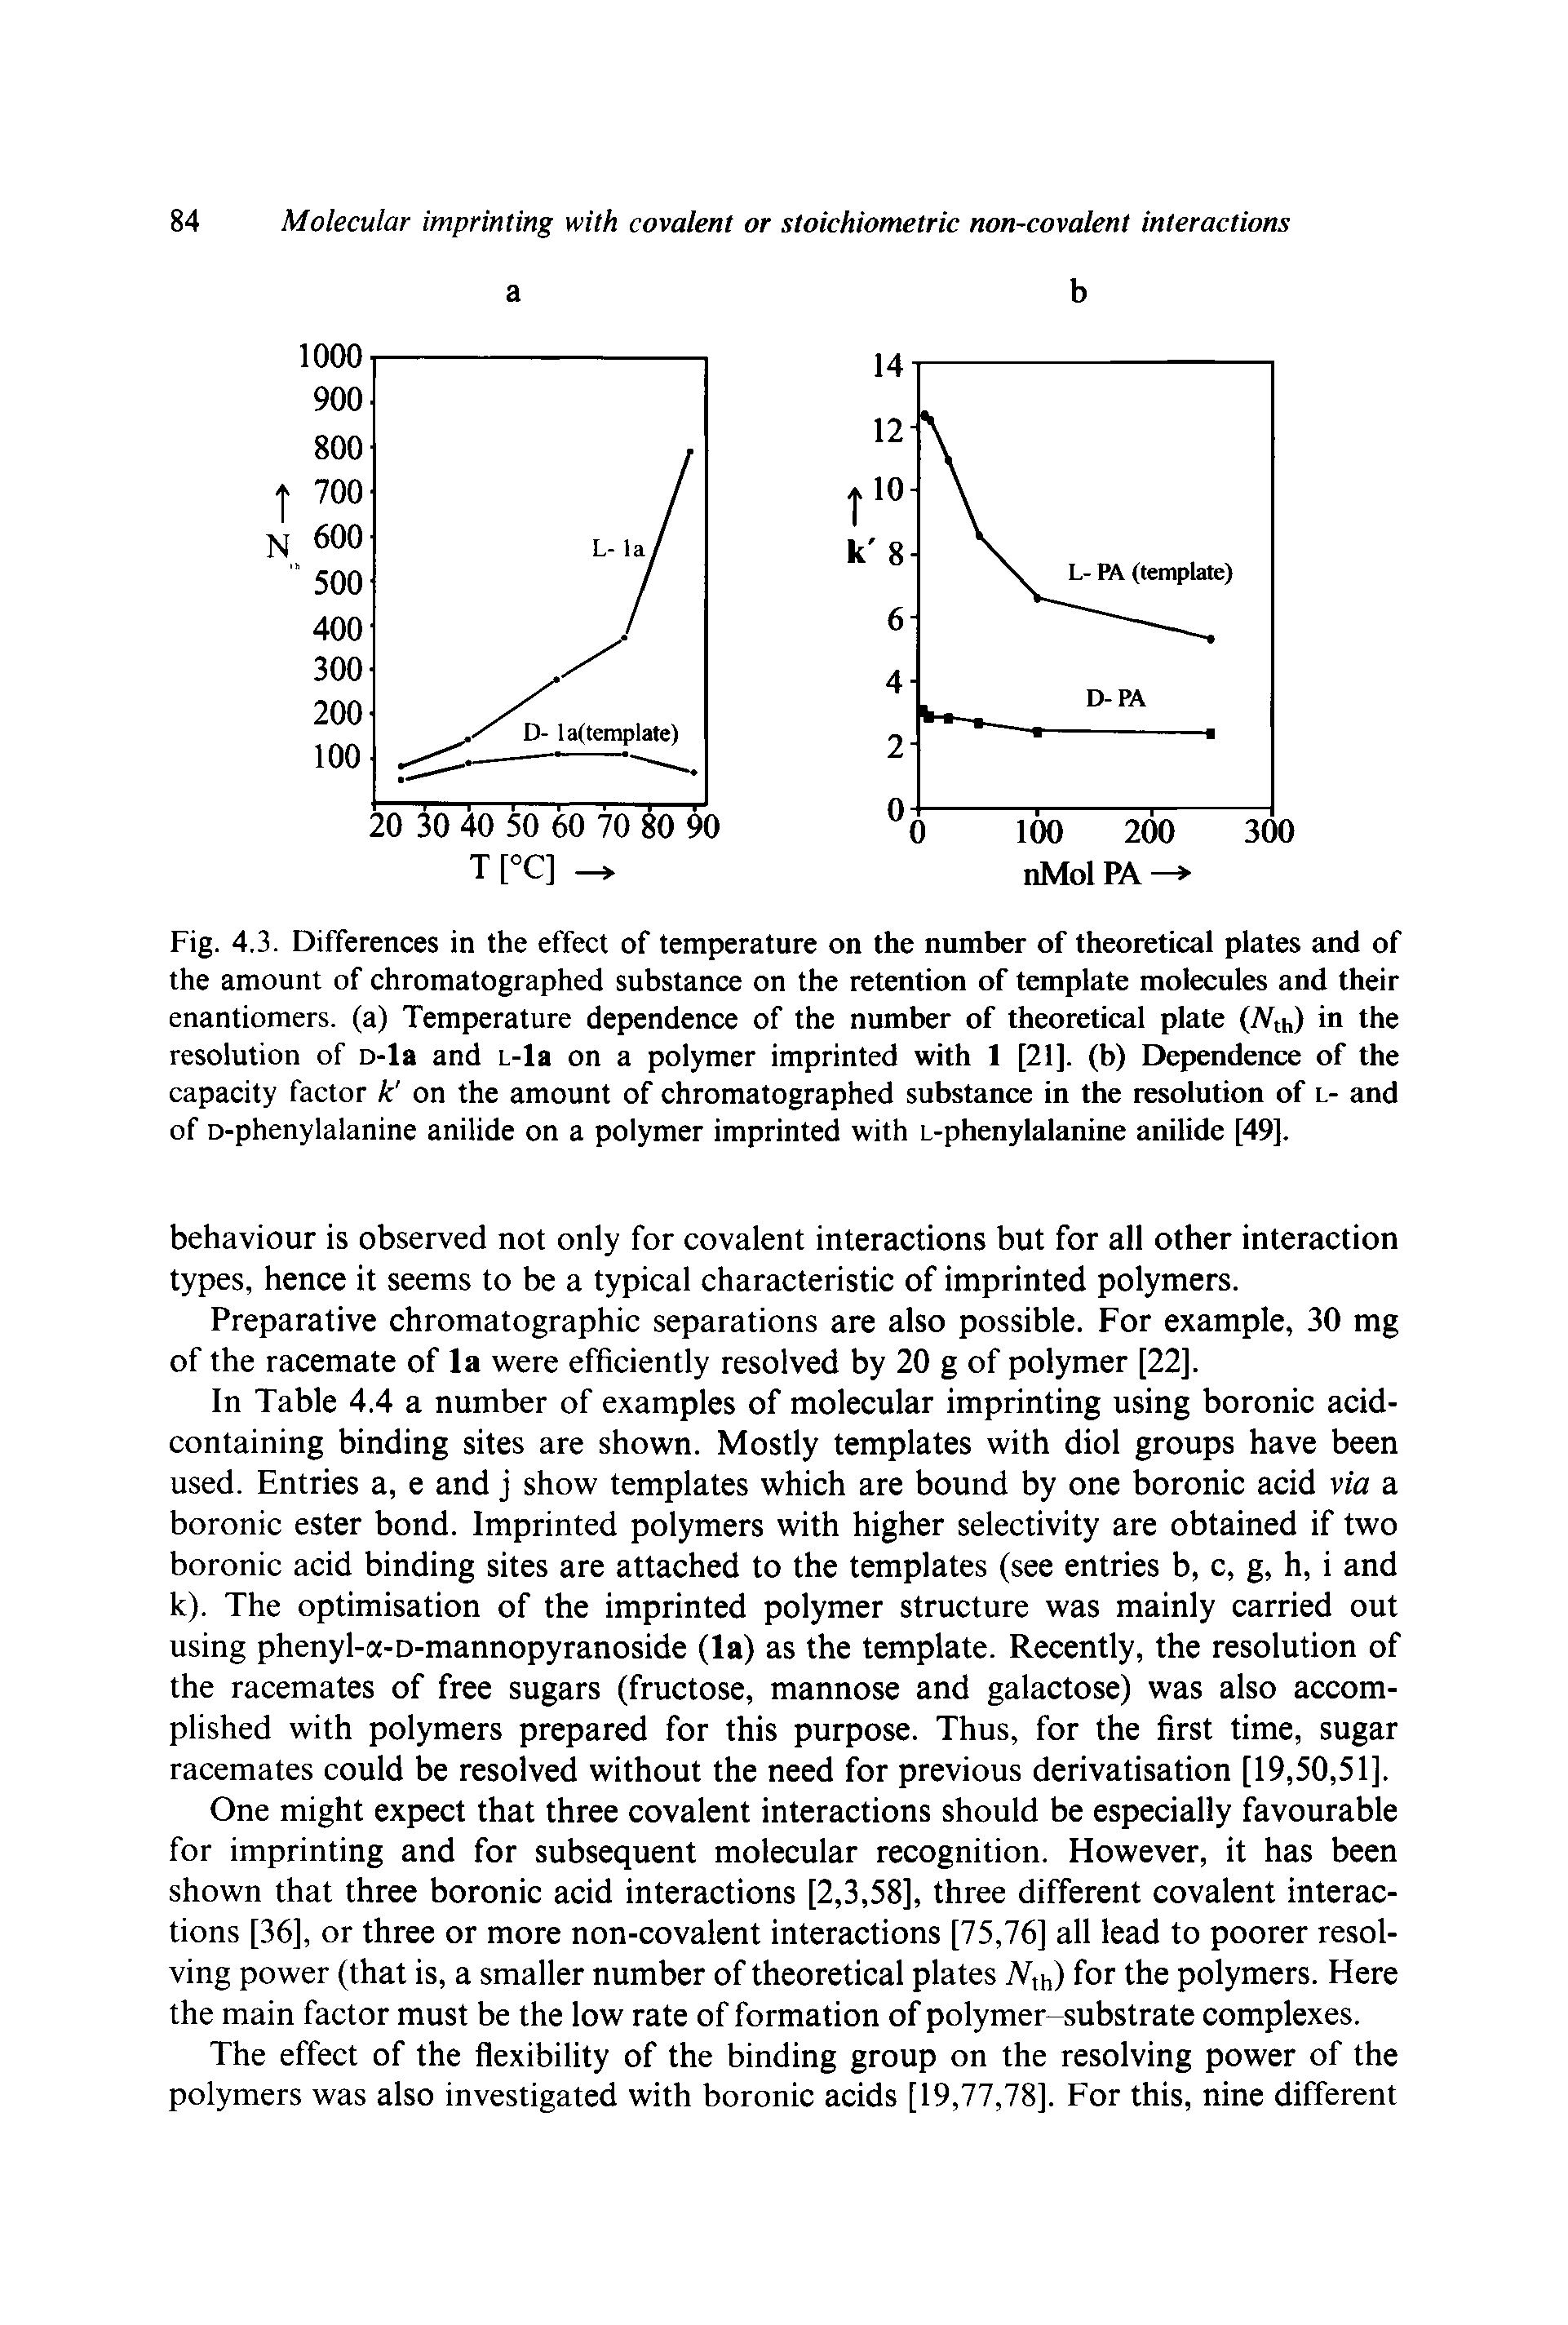 Fig. 4,3. Differences in the effect of temperature on the number of theoretical plates and of the amount of chromatographed substance on the retention of template molecules and their enantiomers, (a) Temperature dependence of the number of theoretical plate Wh) in the resolution of D-la and L-la on a polymer imprinted with 1 [21]. (b) Dependence of the capacity factor k on the amount of chromatographed substance in the resolution of l- and of D-phenylalanine anilide on a polymer imprinted with L-phenylalanine anilide [49],...